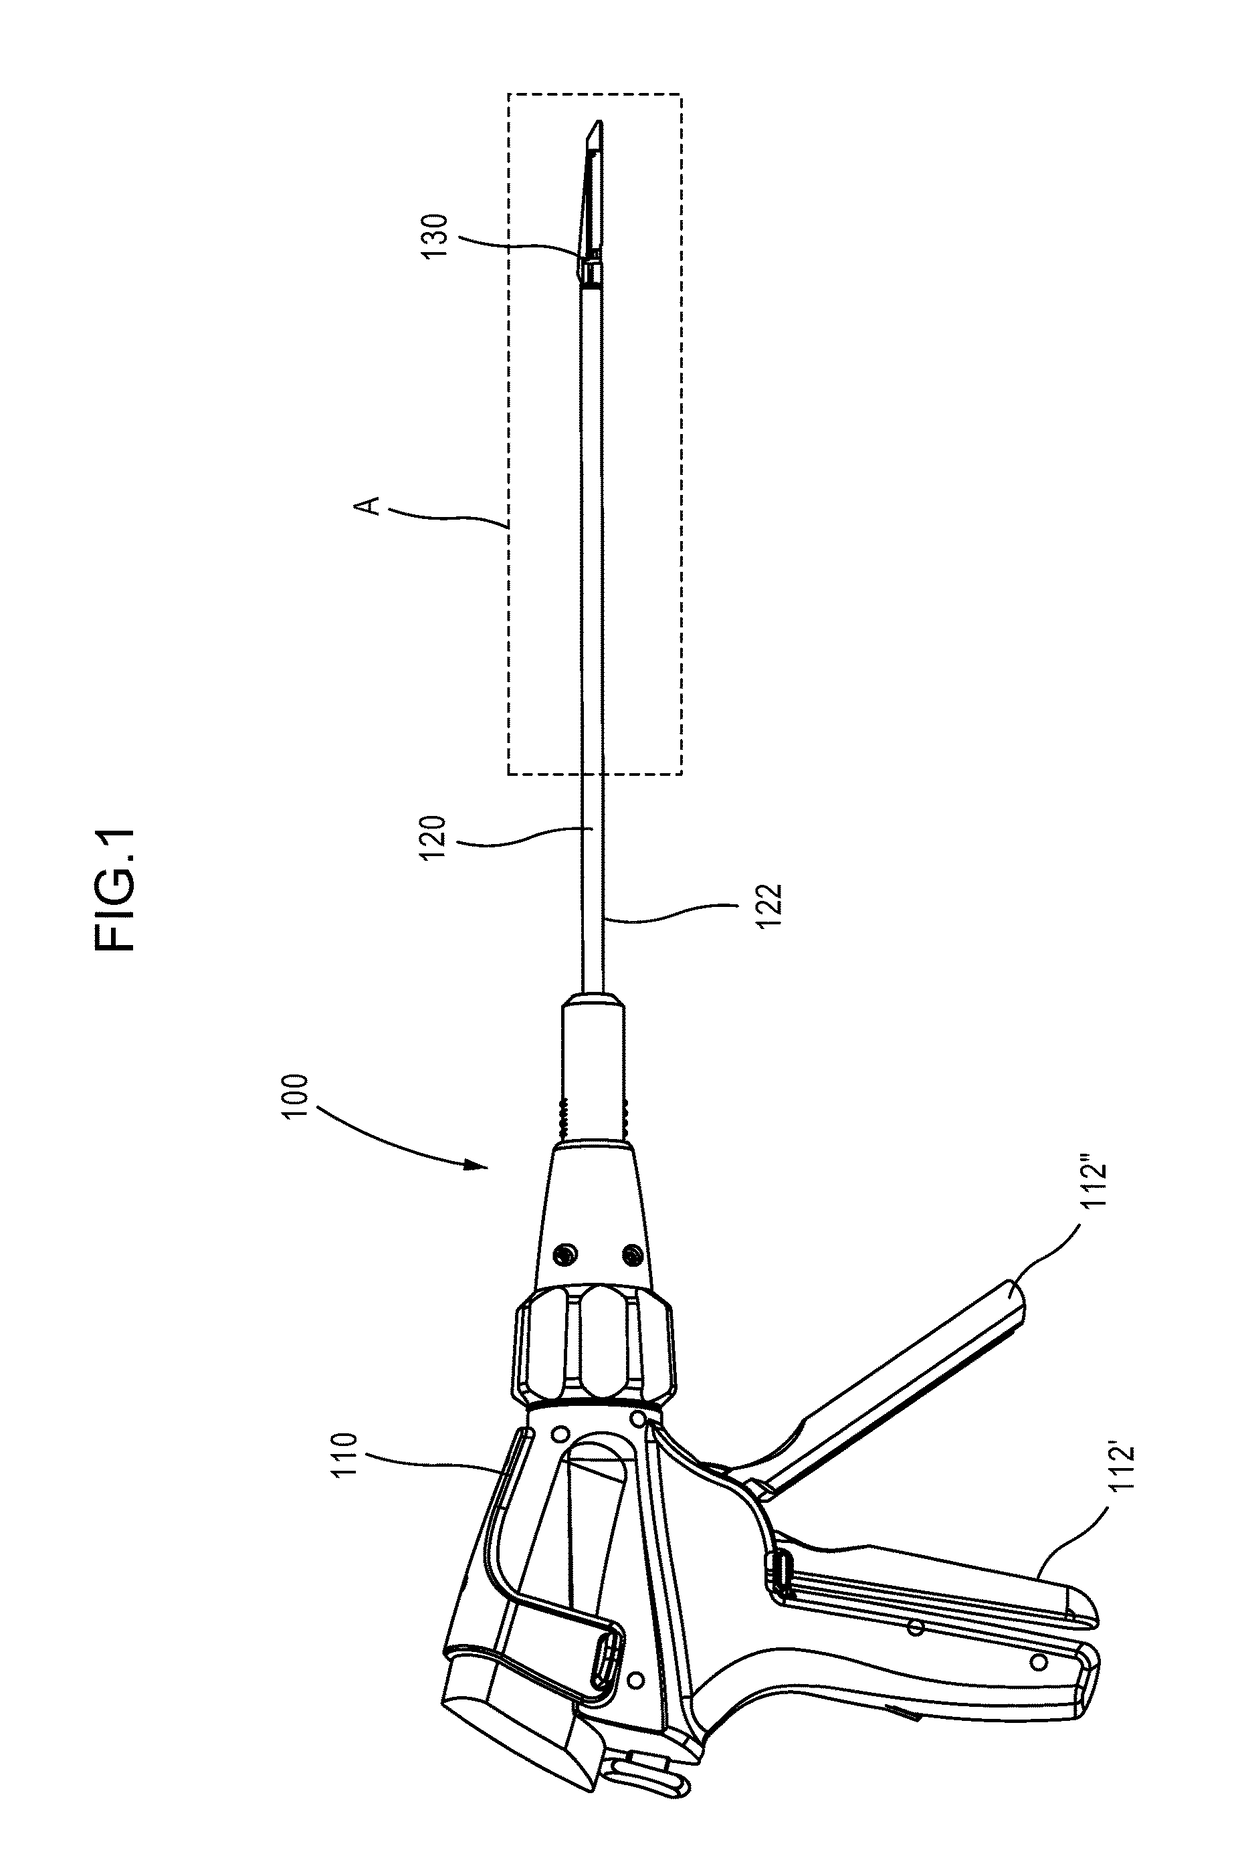 Device for use in laparoscopic surgery and method of use